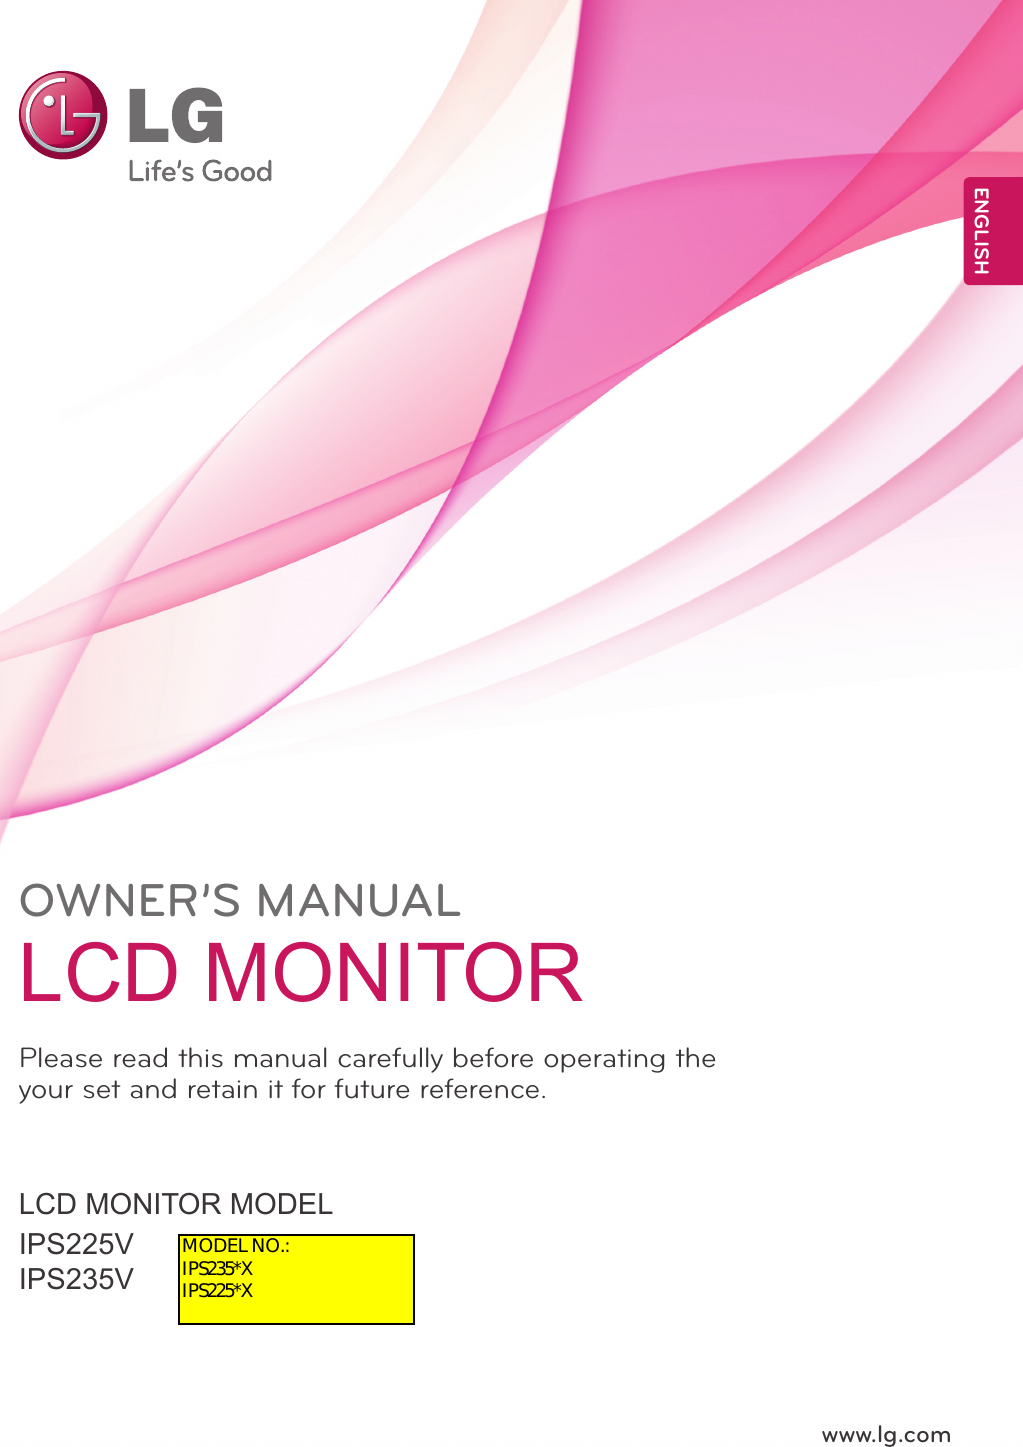 www.lg.comOWNER’S MANUALLCD MONITORIPS225VIPS235VLCD MONITOR MODELPlease read this manual carefully before operating the your set and retain it for future reference.ENGLISHMODEL NO.:IPS235*XIPS225*X